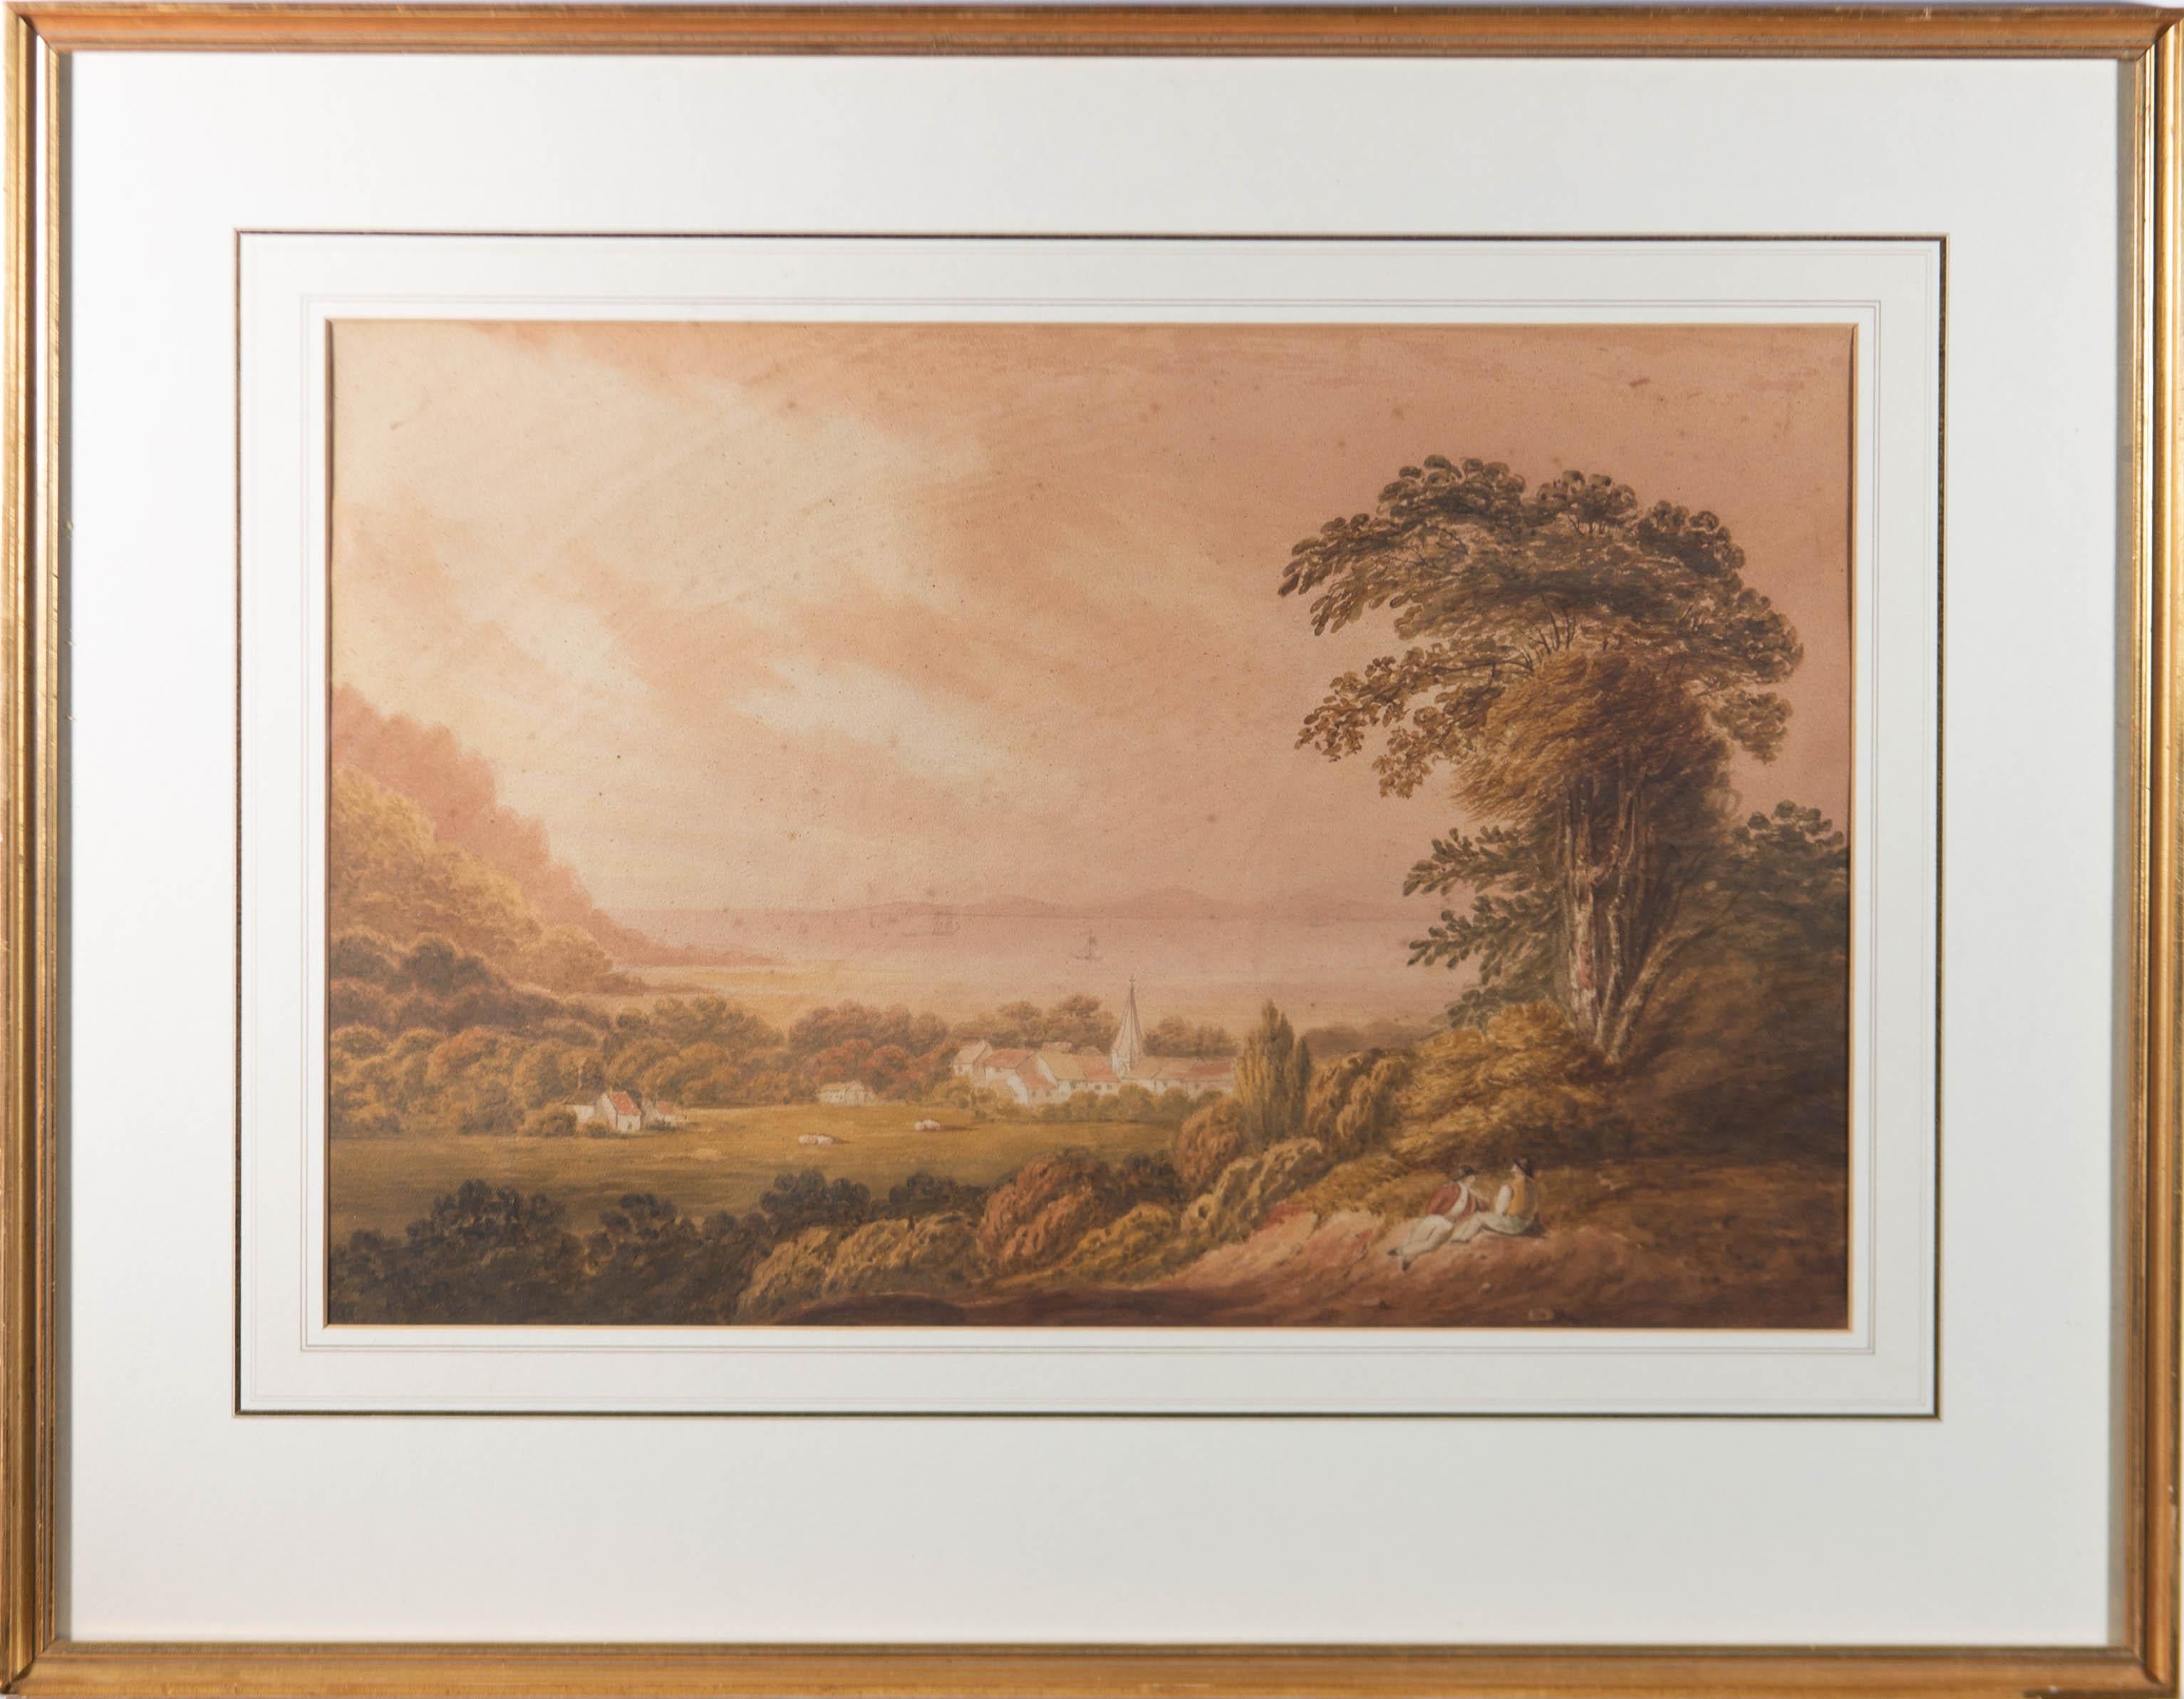 A wonderful 19th century watercolour study depicting a rural landscape with two figures. A small village is visible in the distance and a lake beyond. With delicate graphite detail. The artist has inscribed their initials into a small rock within